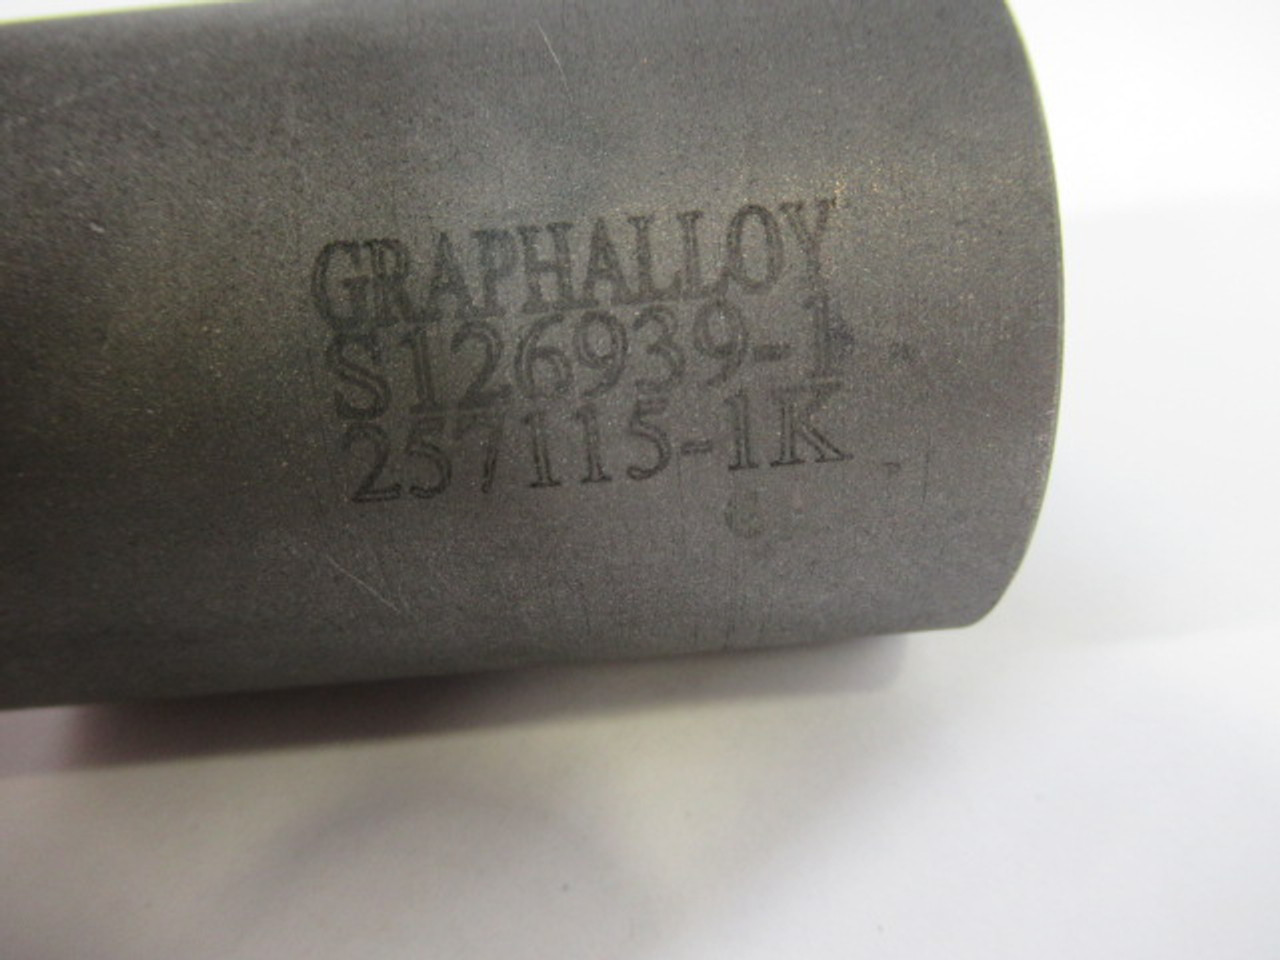 Graphalloy S126939-1 Pump Bearing Spacer Sleeve 2"OD 1.70"ID 3"H ! NOP !